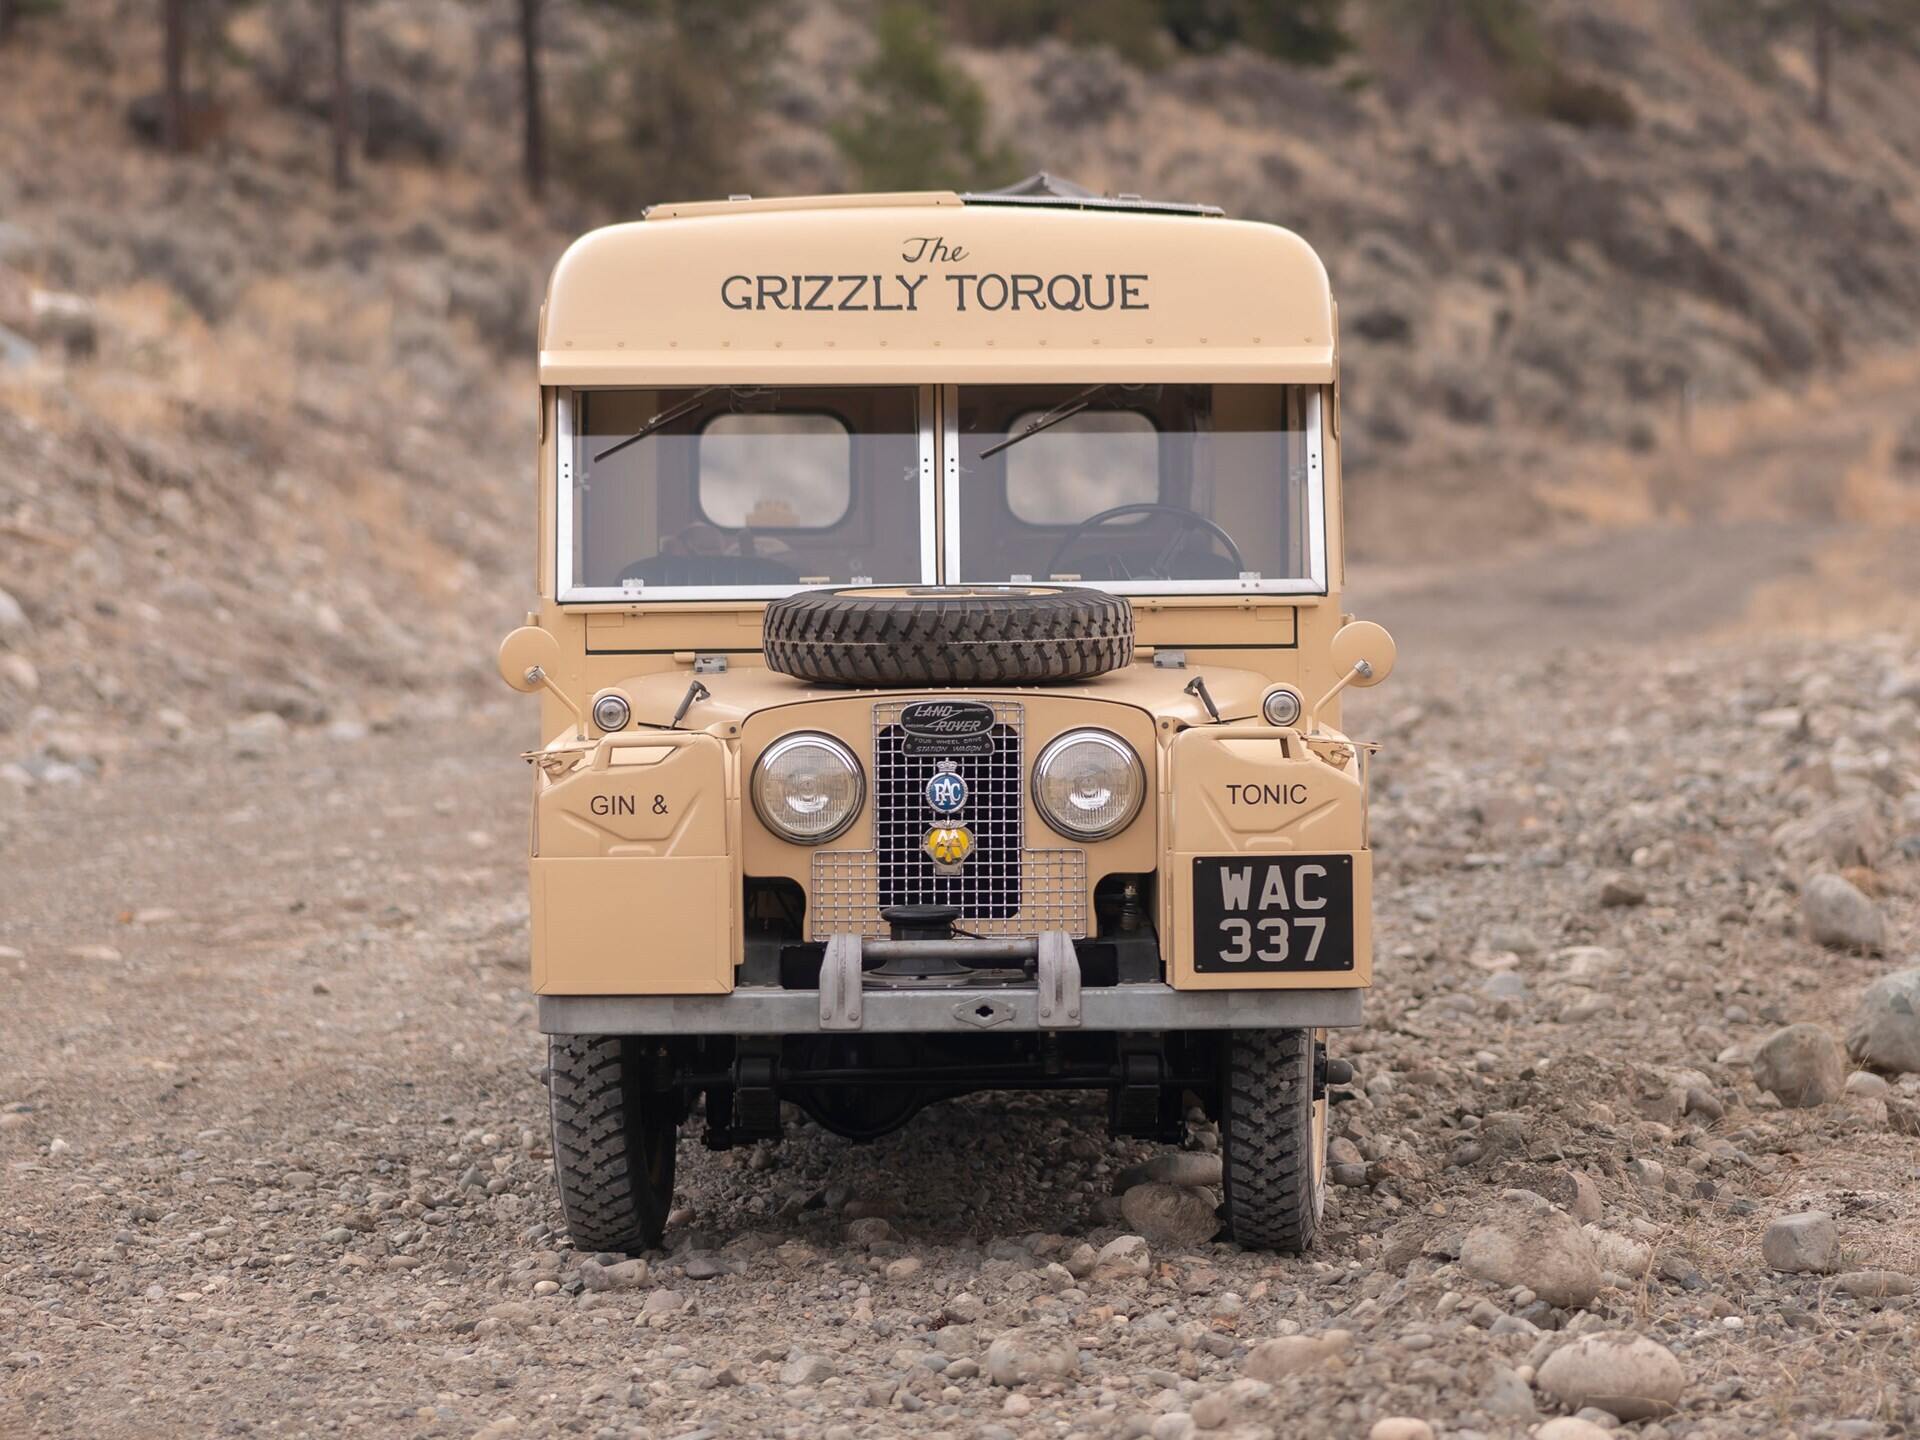 Grizzly Torque Land Rover World journey